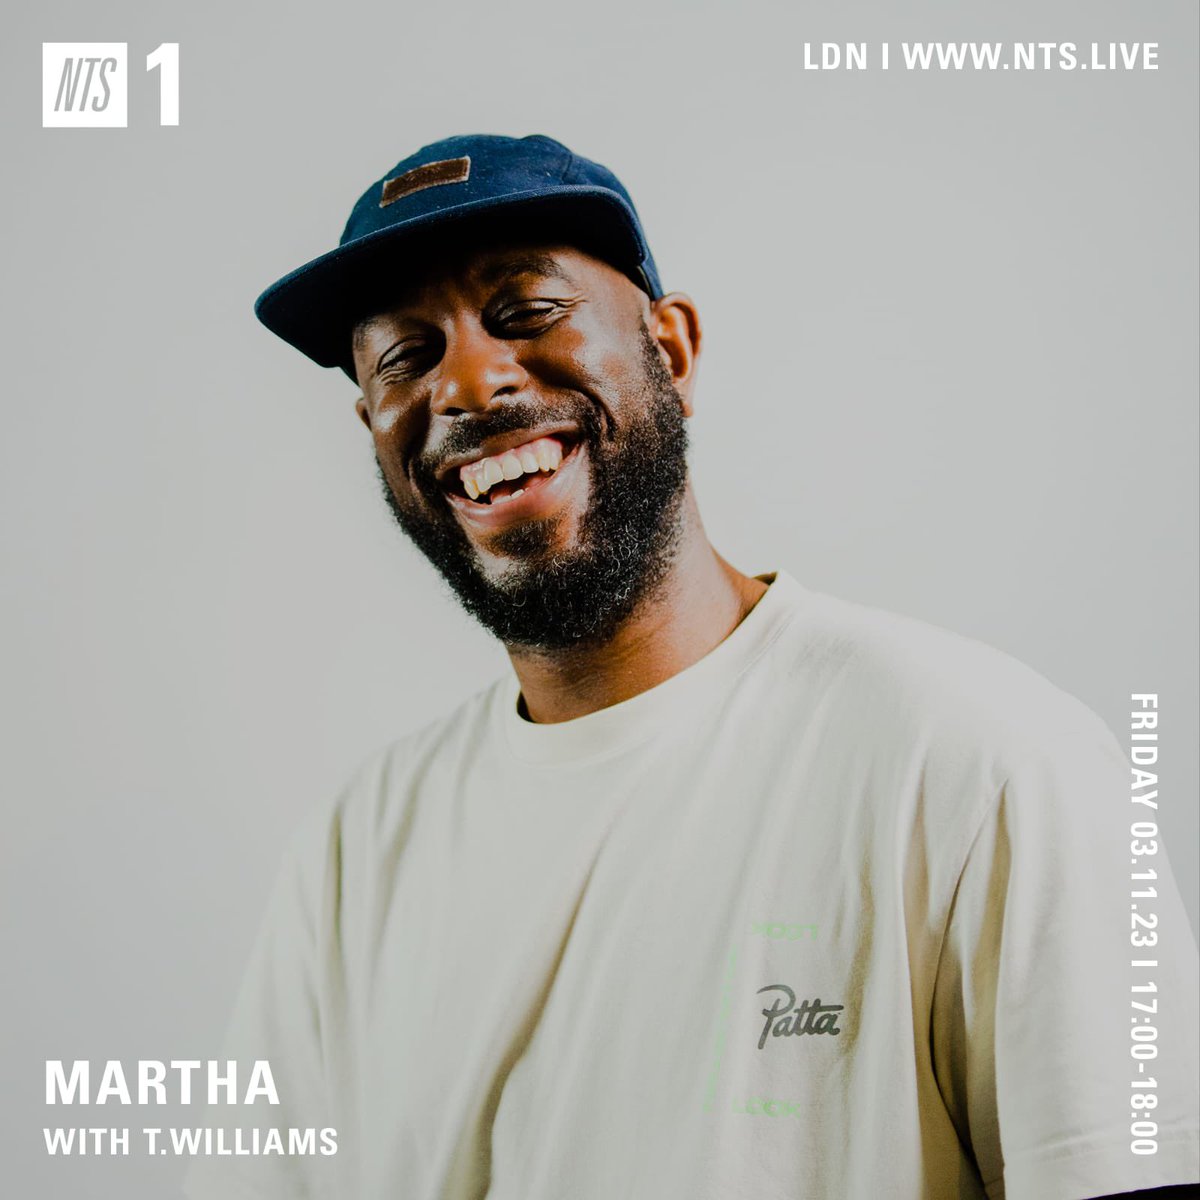 I’m on the amazing @MARTHAradio @NTSlive show today from 1700 (GMT) looking forward to talking about all my new releases and influences on these projects!! 💜💫✨ nts.live/radio